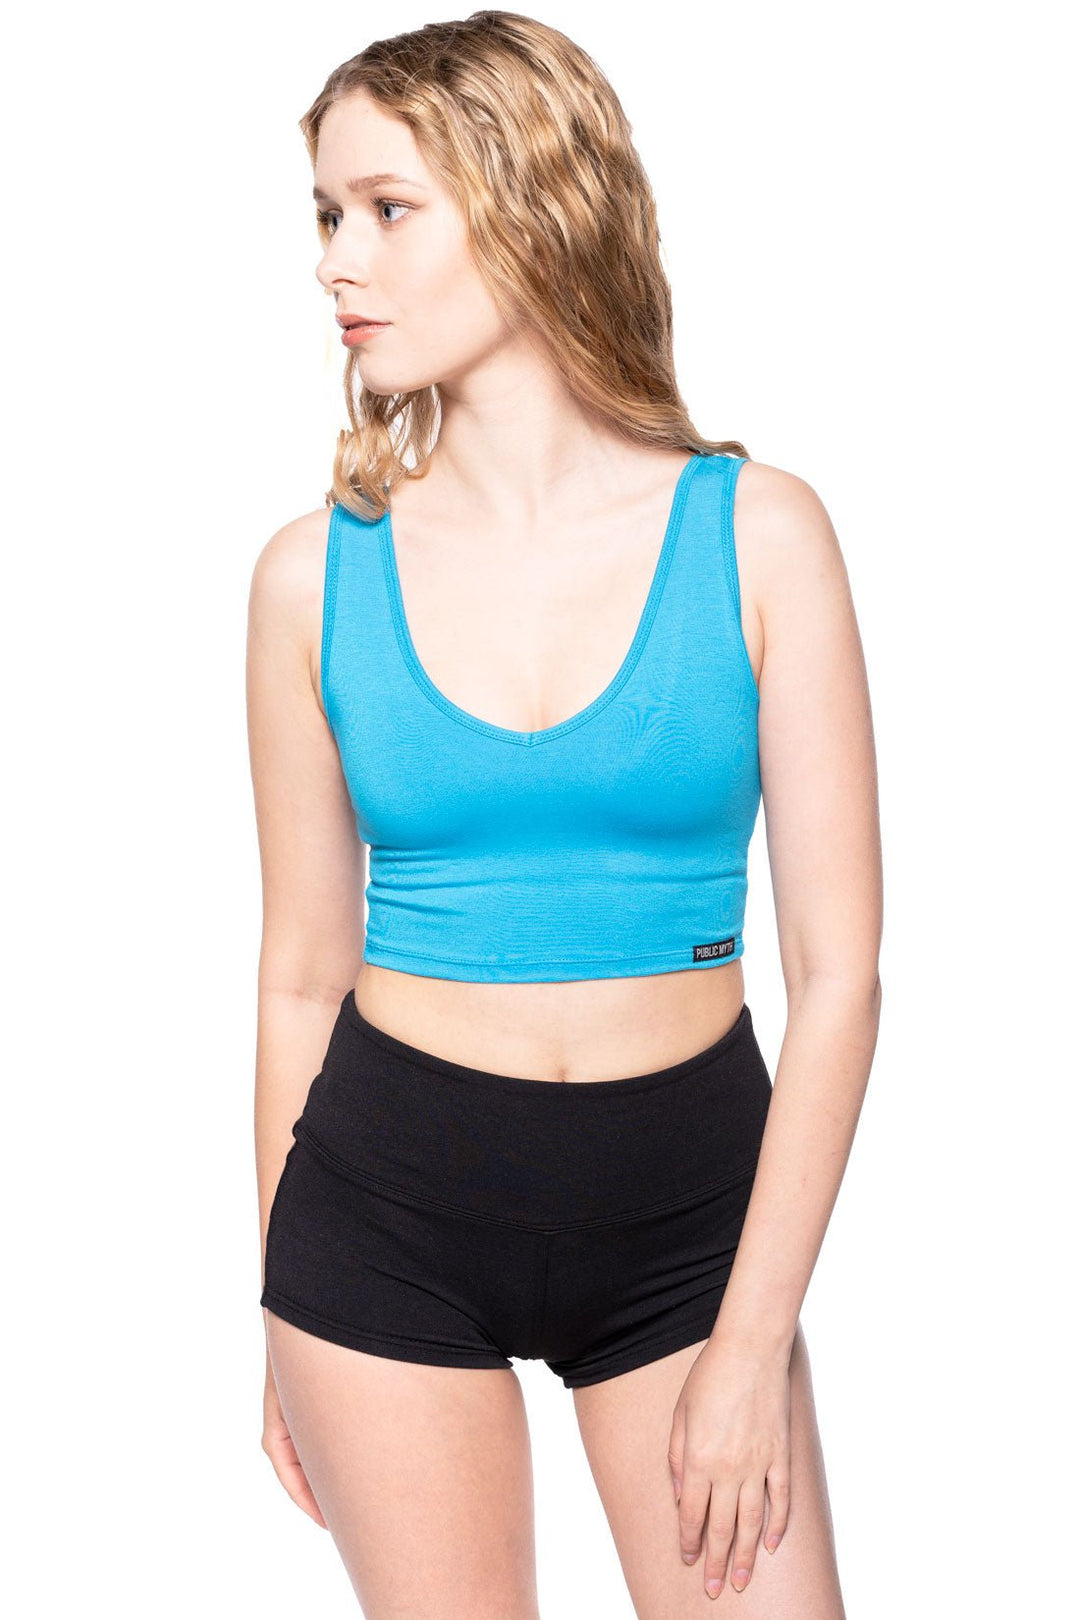 V-Neck Yoga Tops Short-Sleeved Sports Undershirt with Chest Pad - China  Sports Wear and Tops price